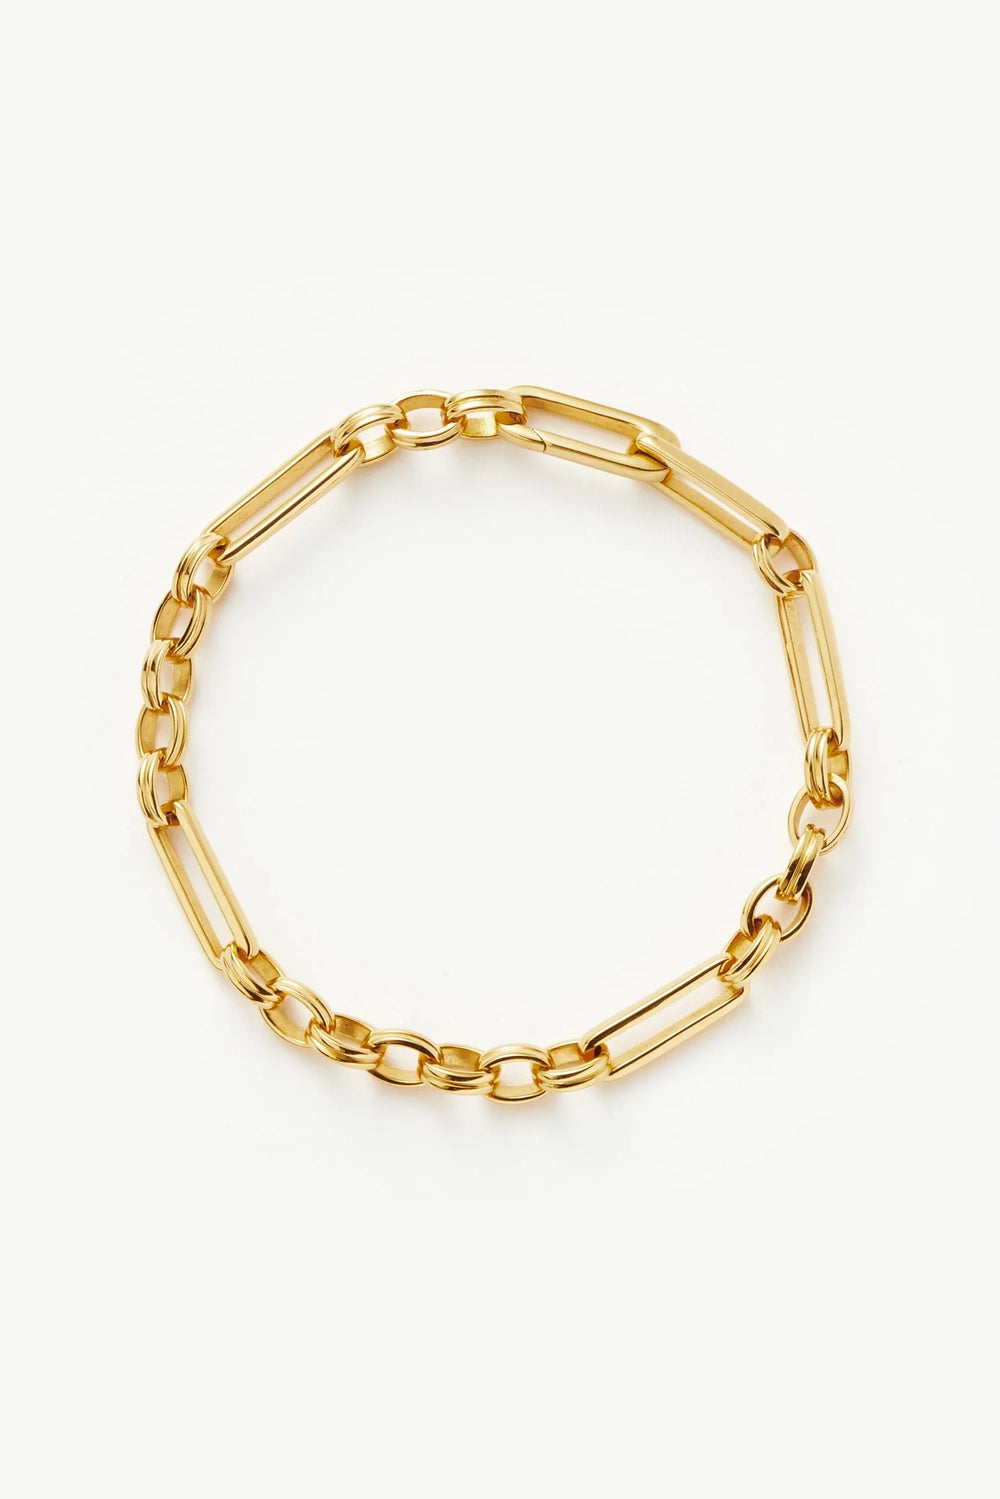 Axiom Chain Bracelet Gold Plated